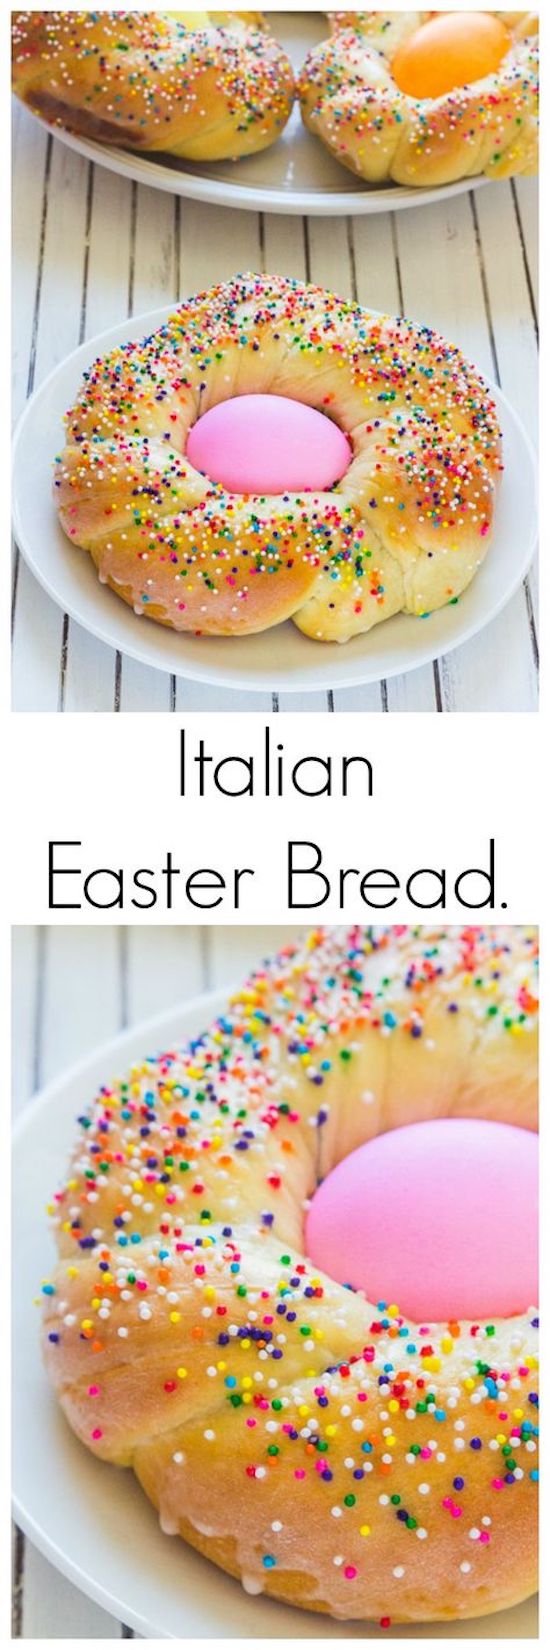 Italian Easter Bread! Look at how cute these Individual Italian Easter Bread rings are! This is a classic Easter day recipe that you must try (if you haven't already).